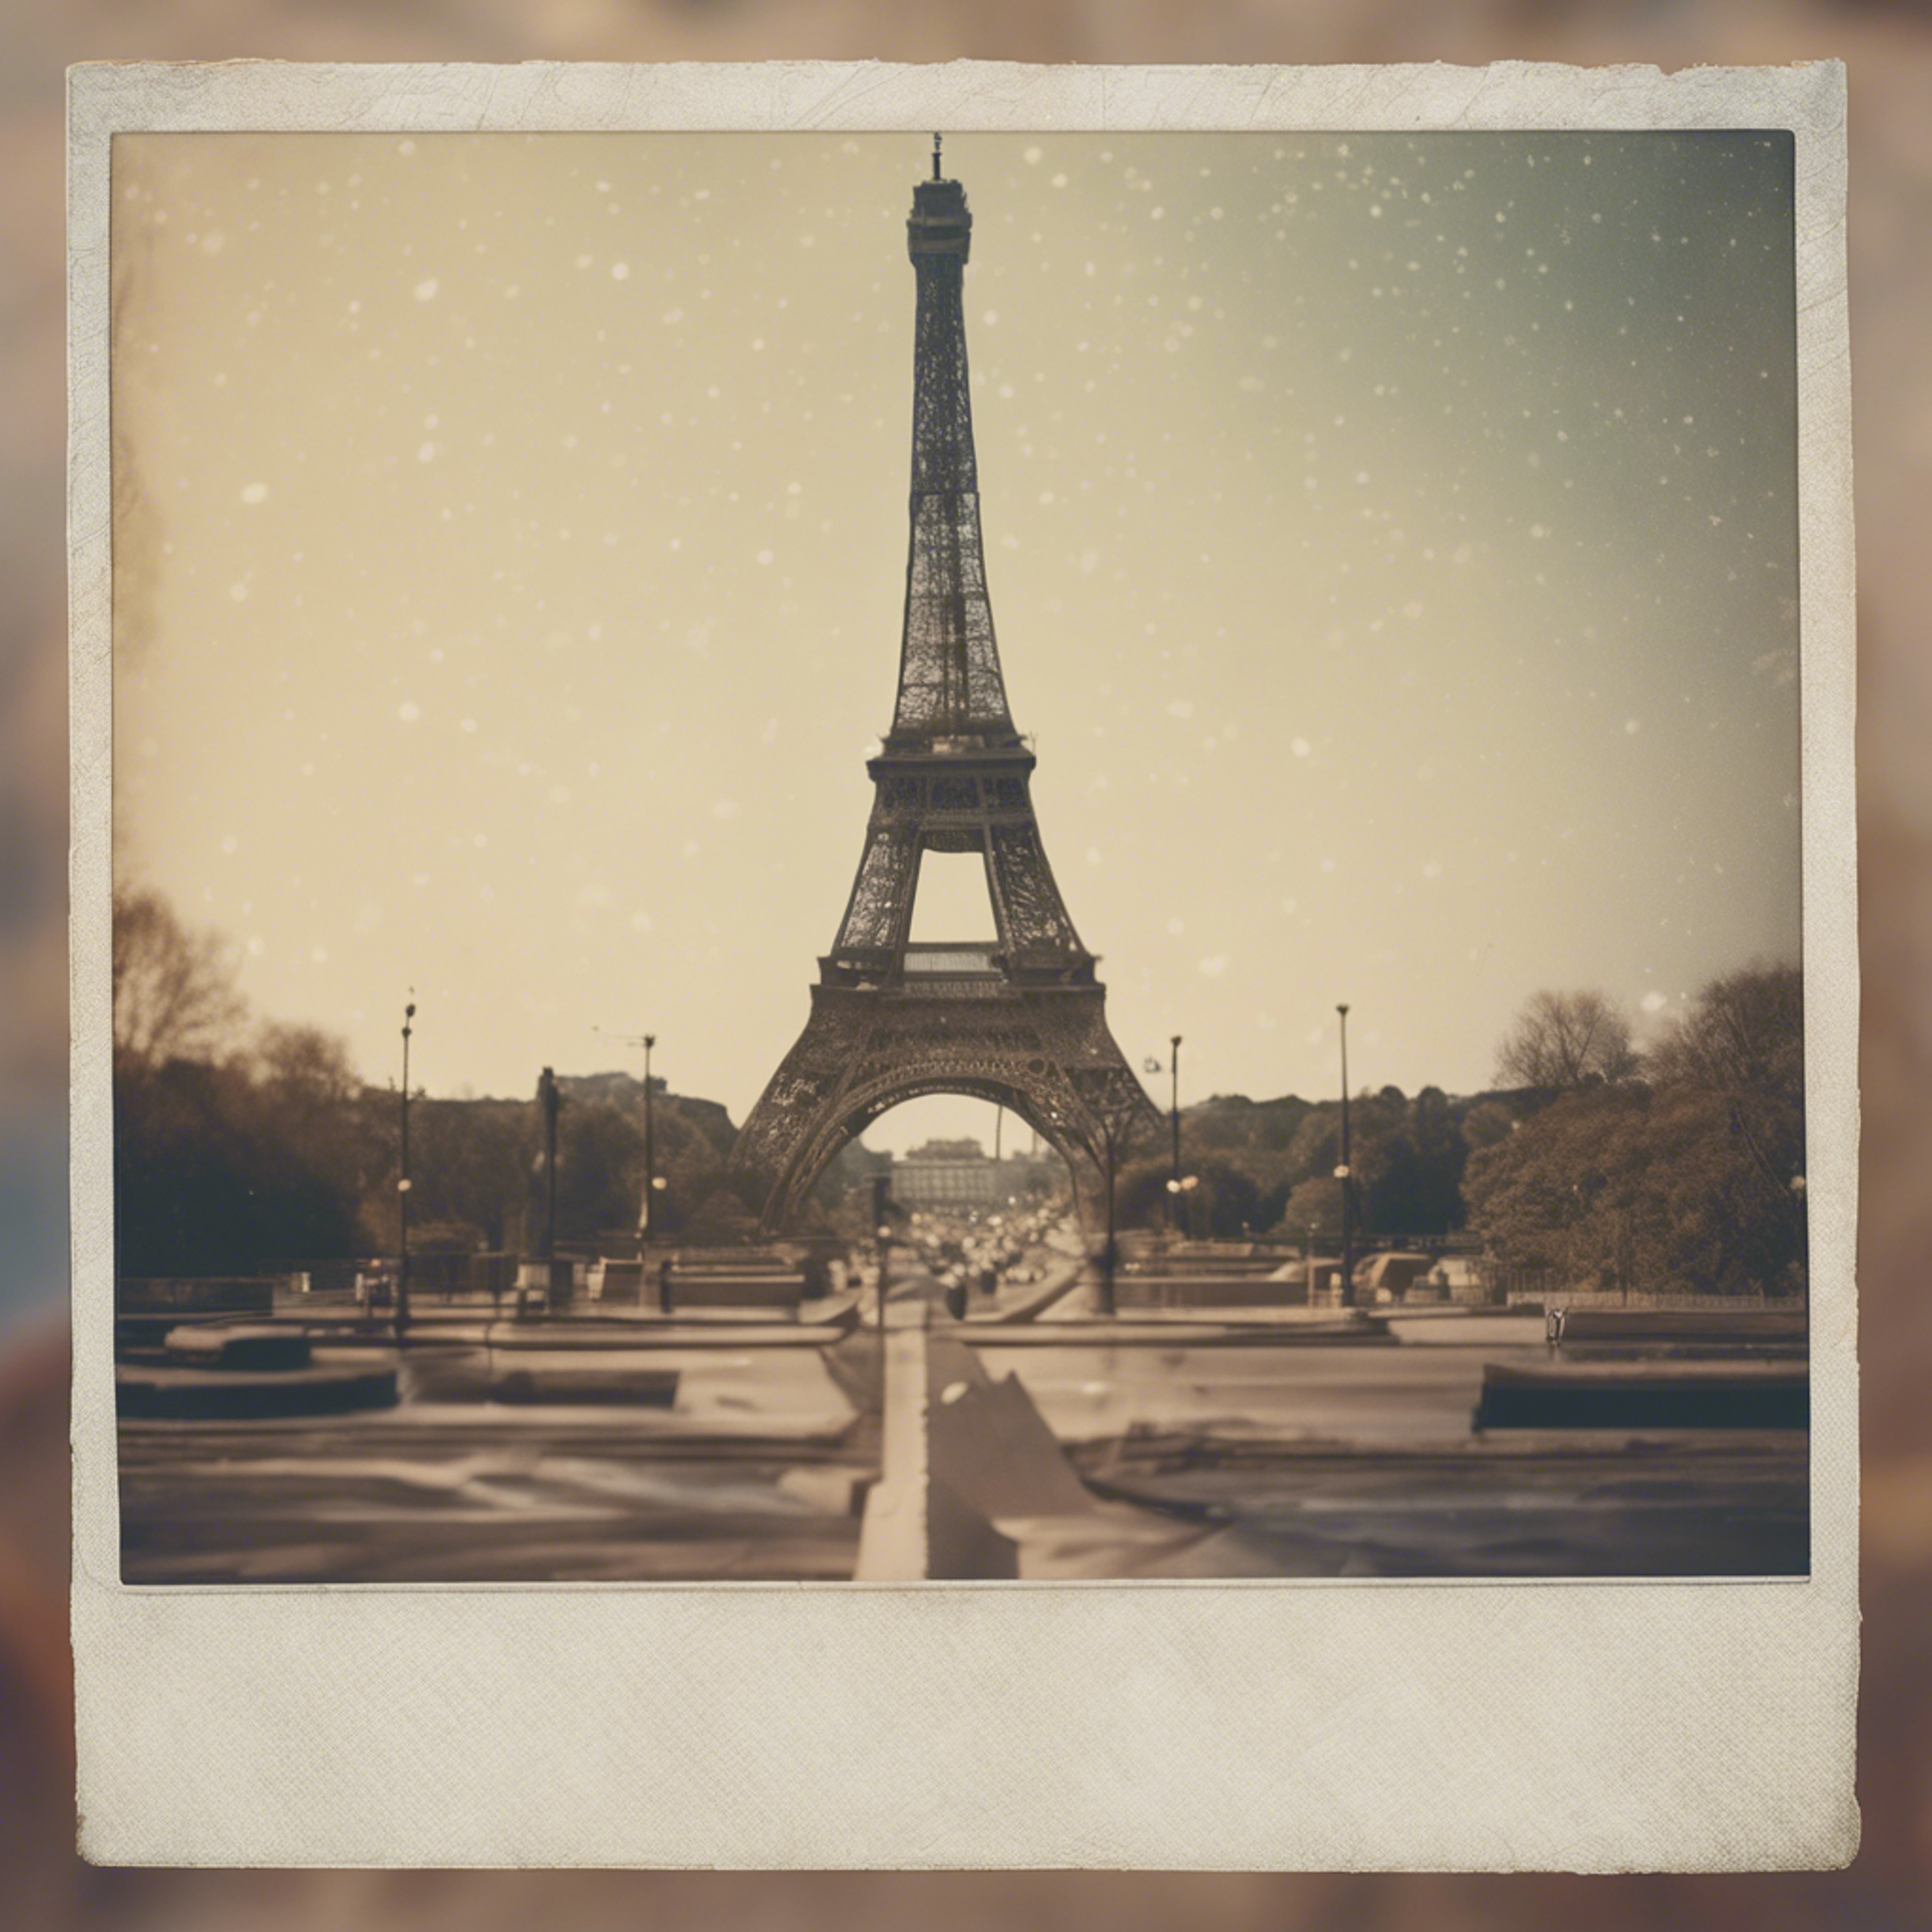 A faded beige Polaroid picture of an iconic landmark from the 70s. Обои[3ceb93f71d2c49b28cf4]